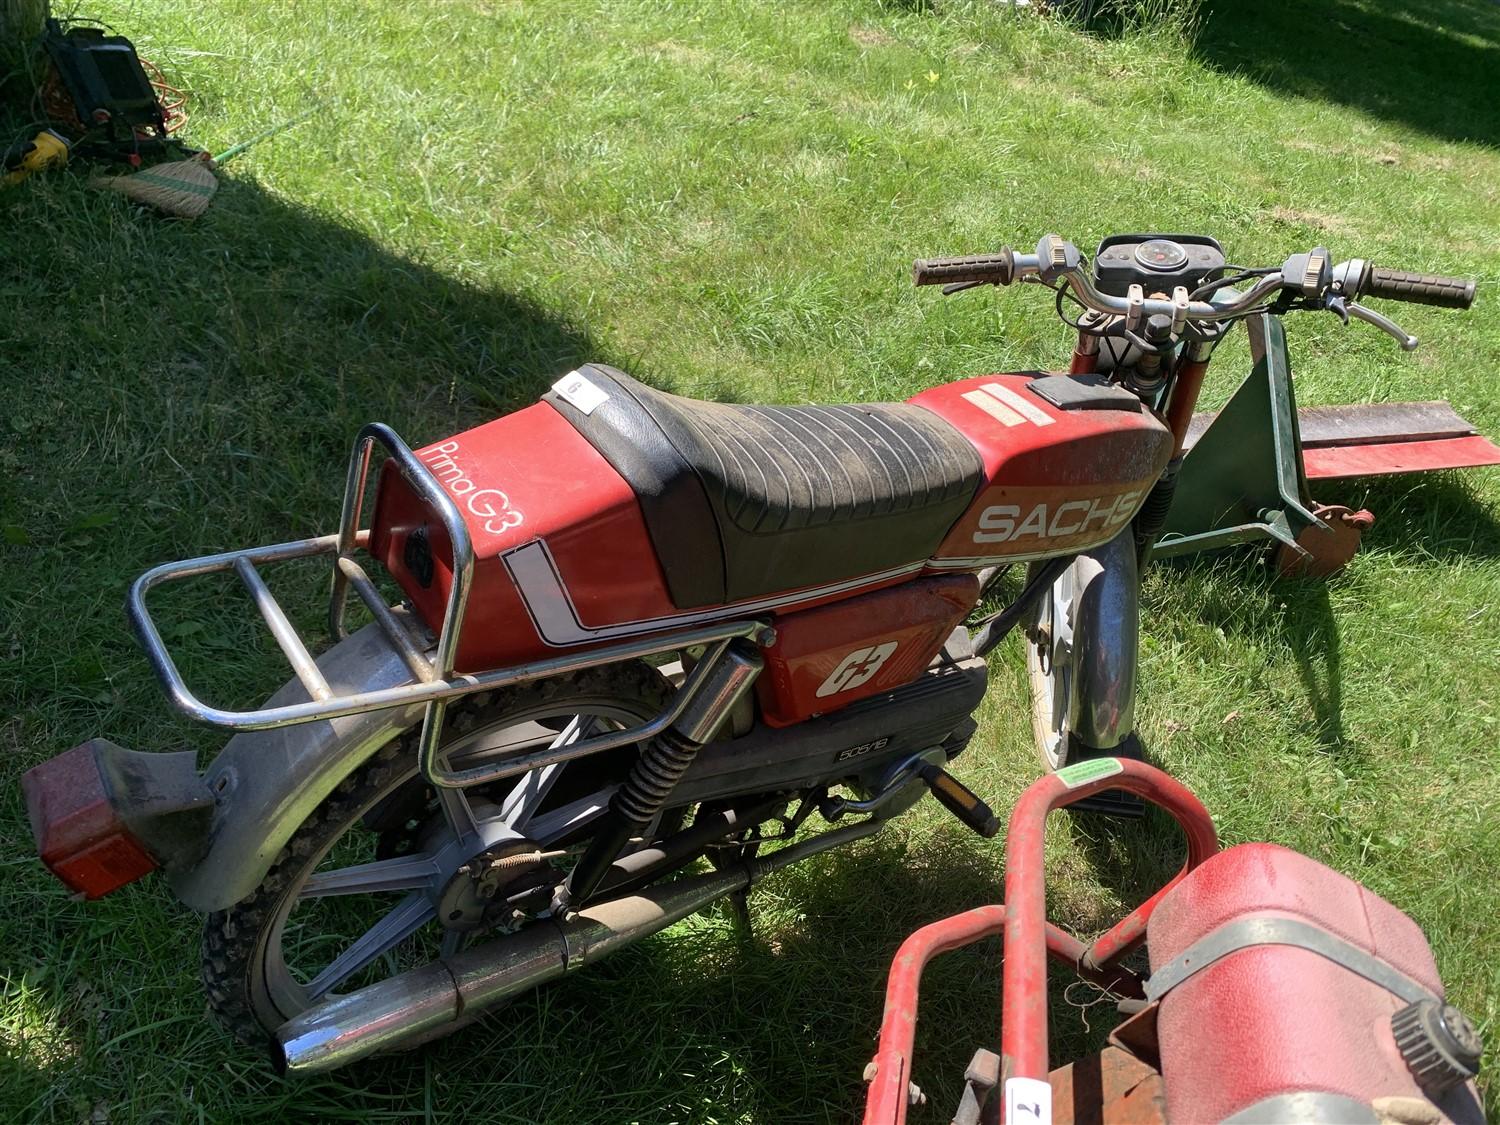 Vintage Sachs G3 Moped